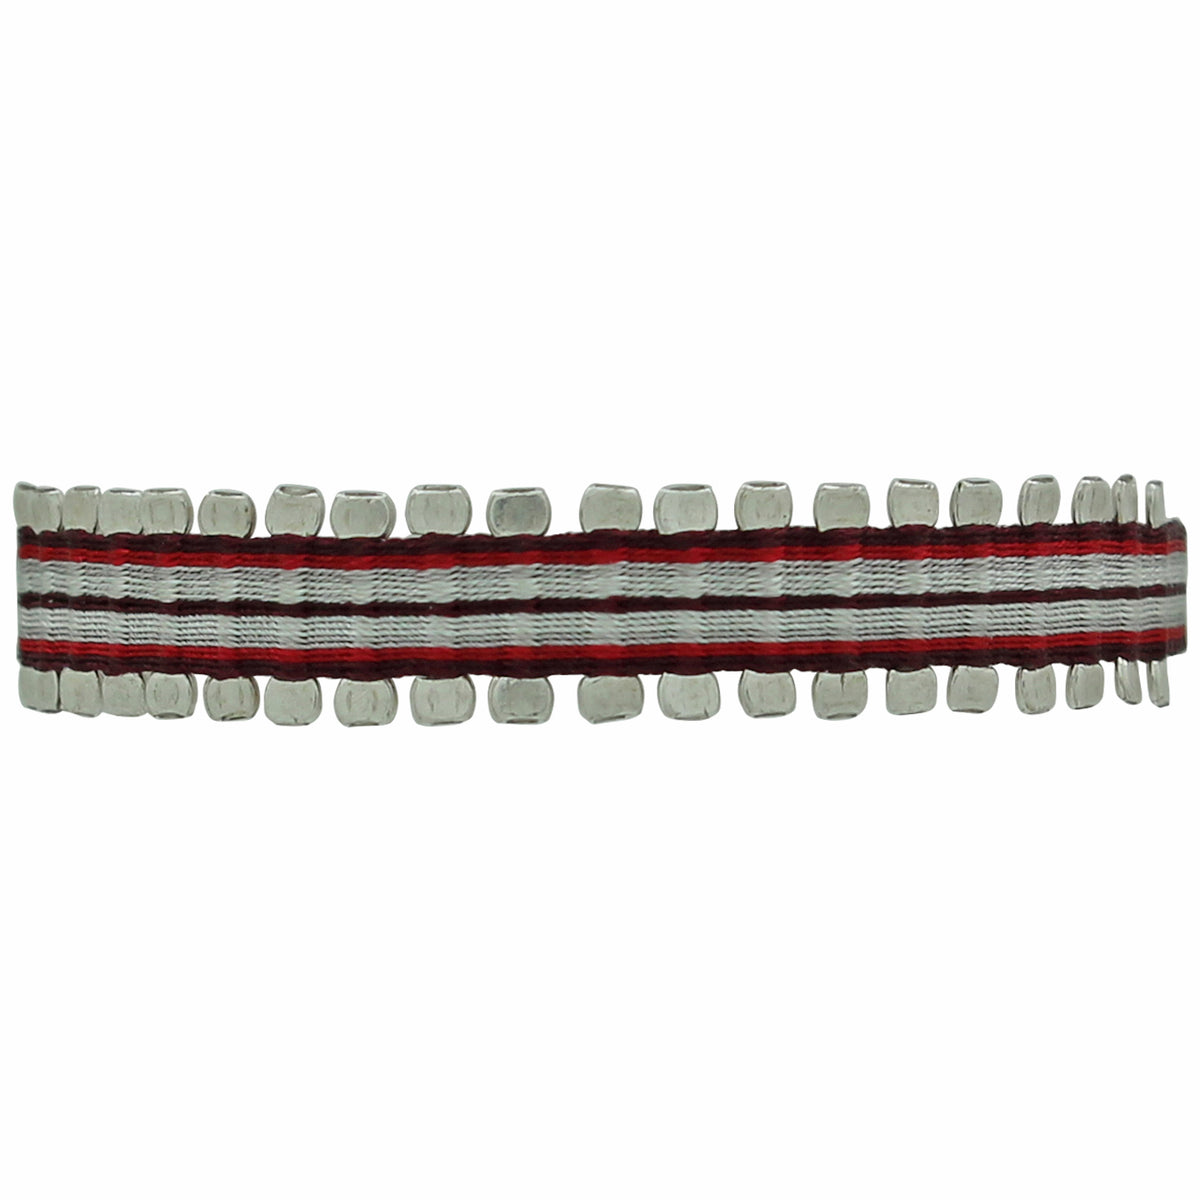 HANDWOVEN PIN BRACELET IN RED TONES FOR HIM